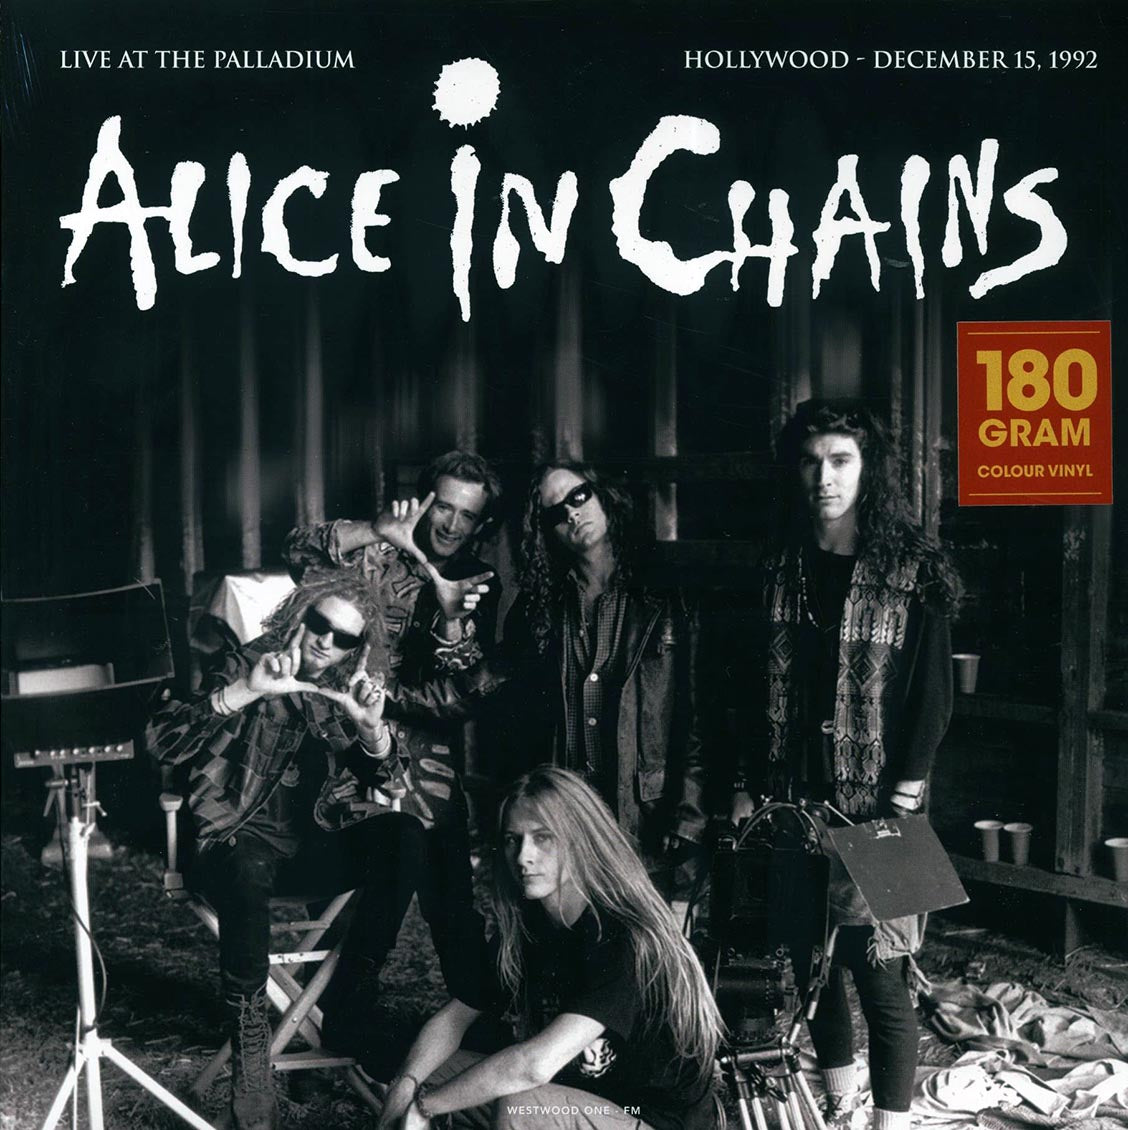 Alice In Chains - Live At The Palladium, Hollywood, December 15, 1992 (180g) (colored vinyl) - Vinyl LP